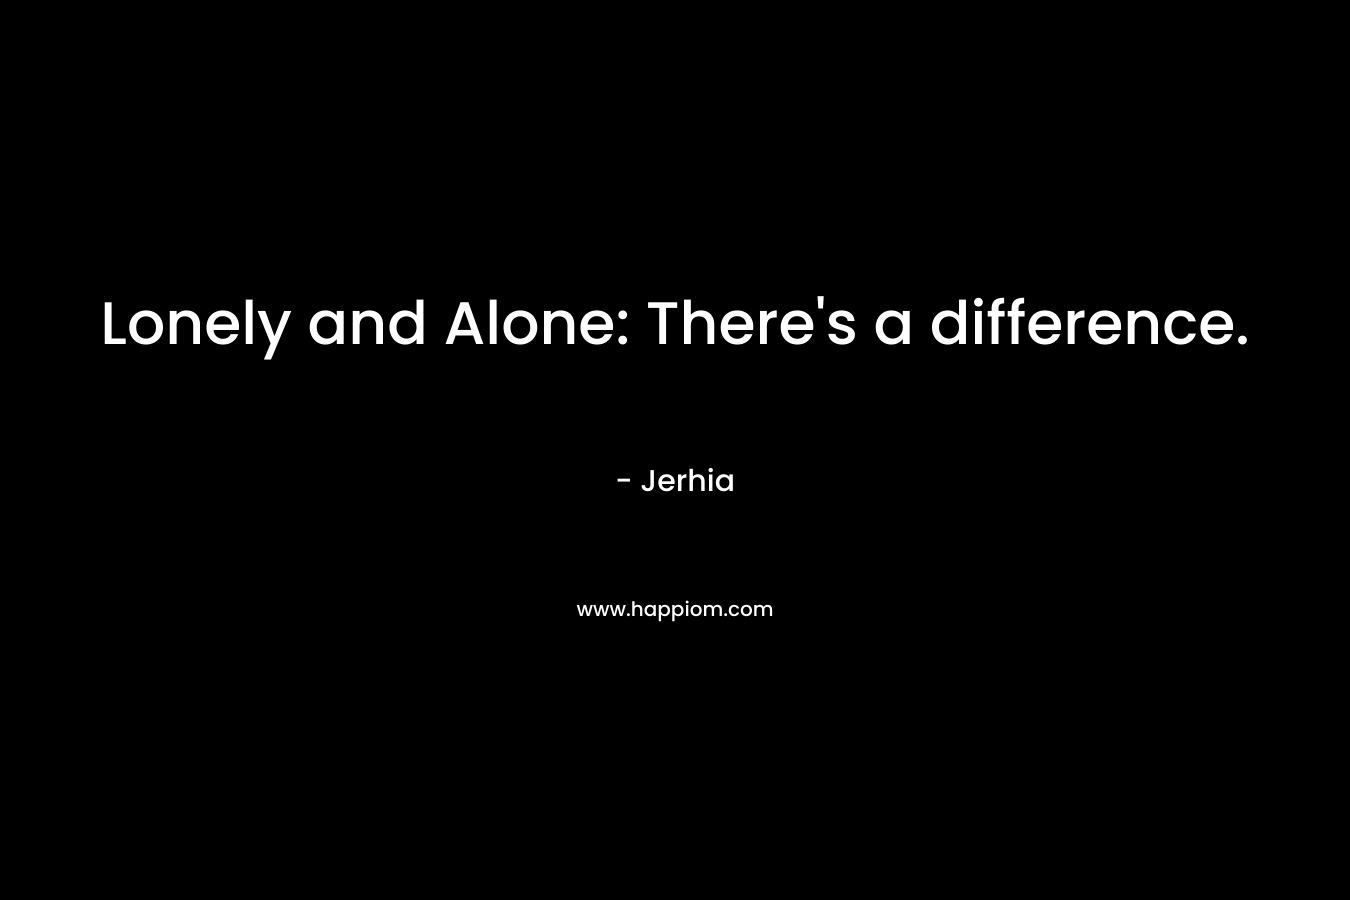 Lonely and Alone: There's a difference.